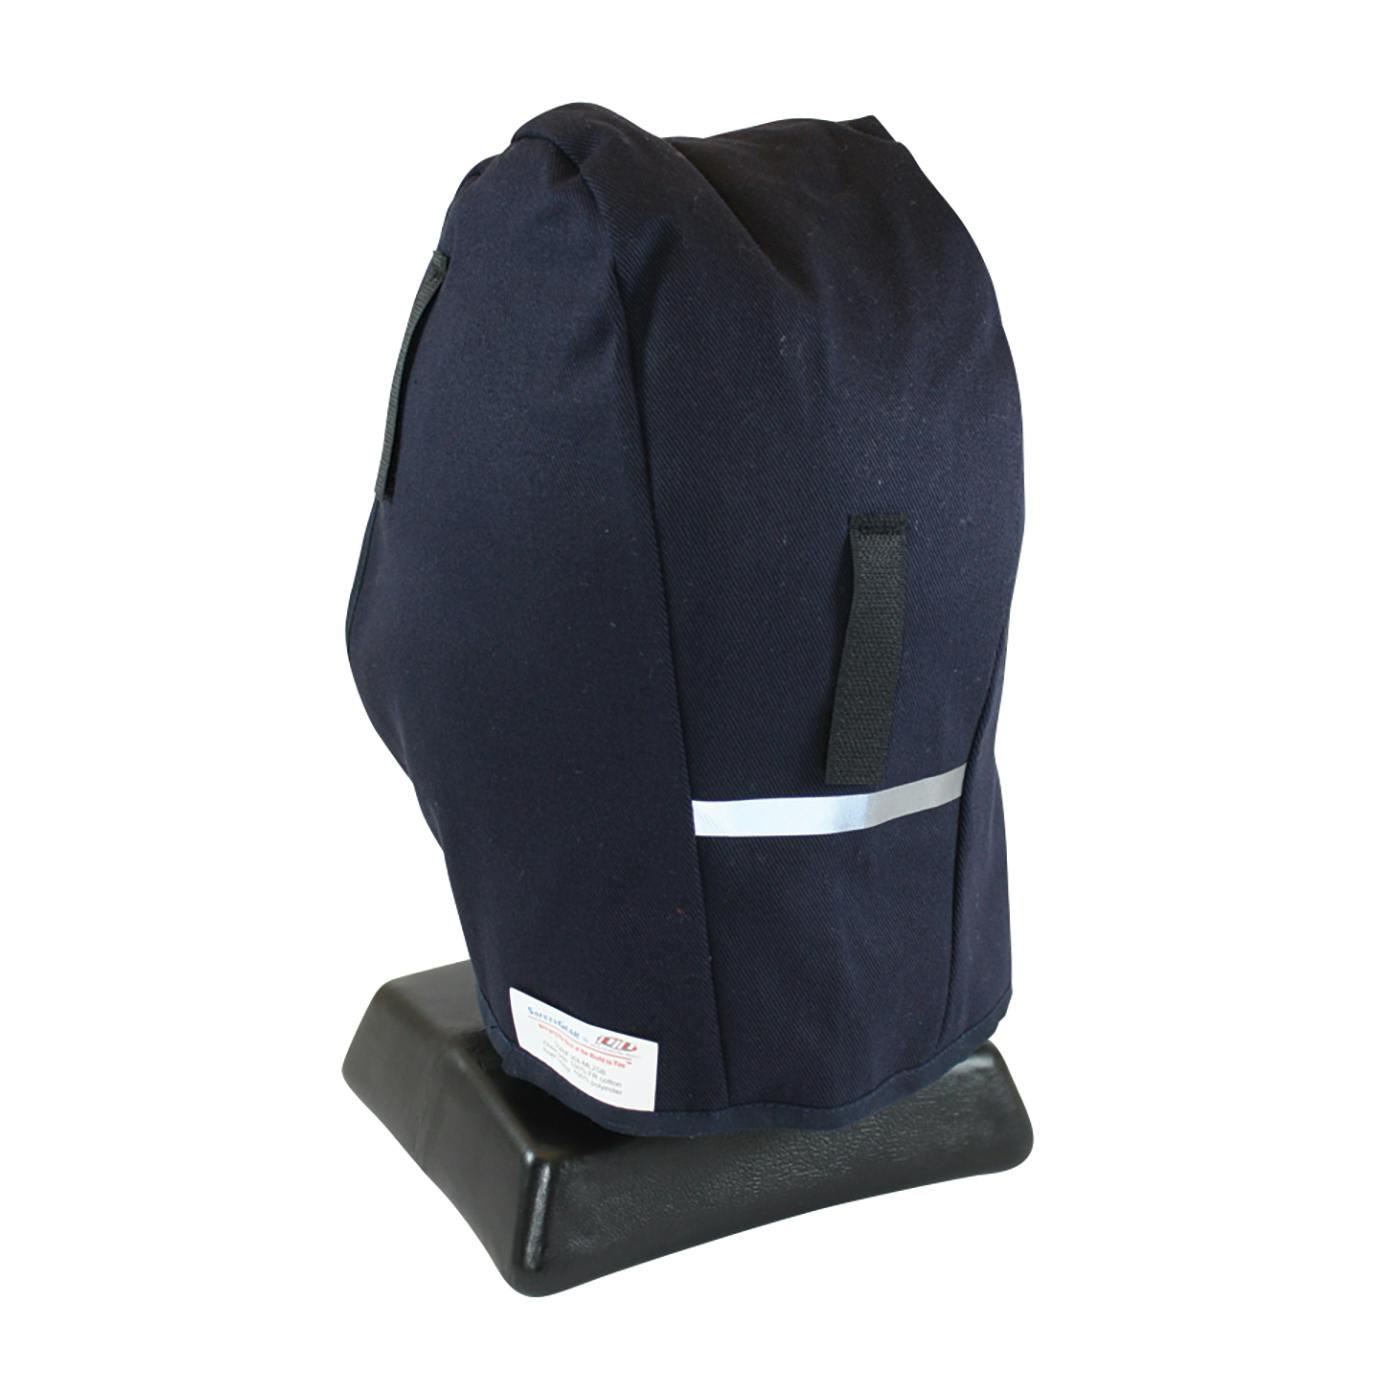 2-Layer Cotton Twill / Sherpa Winter Liner with FR Treated Outer Shell - Mid Length, Navy (364-ML2SB) - OS_1